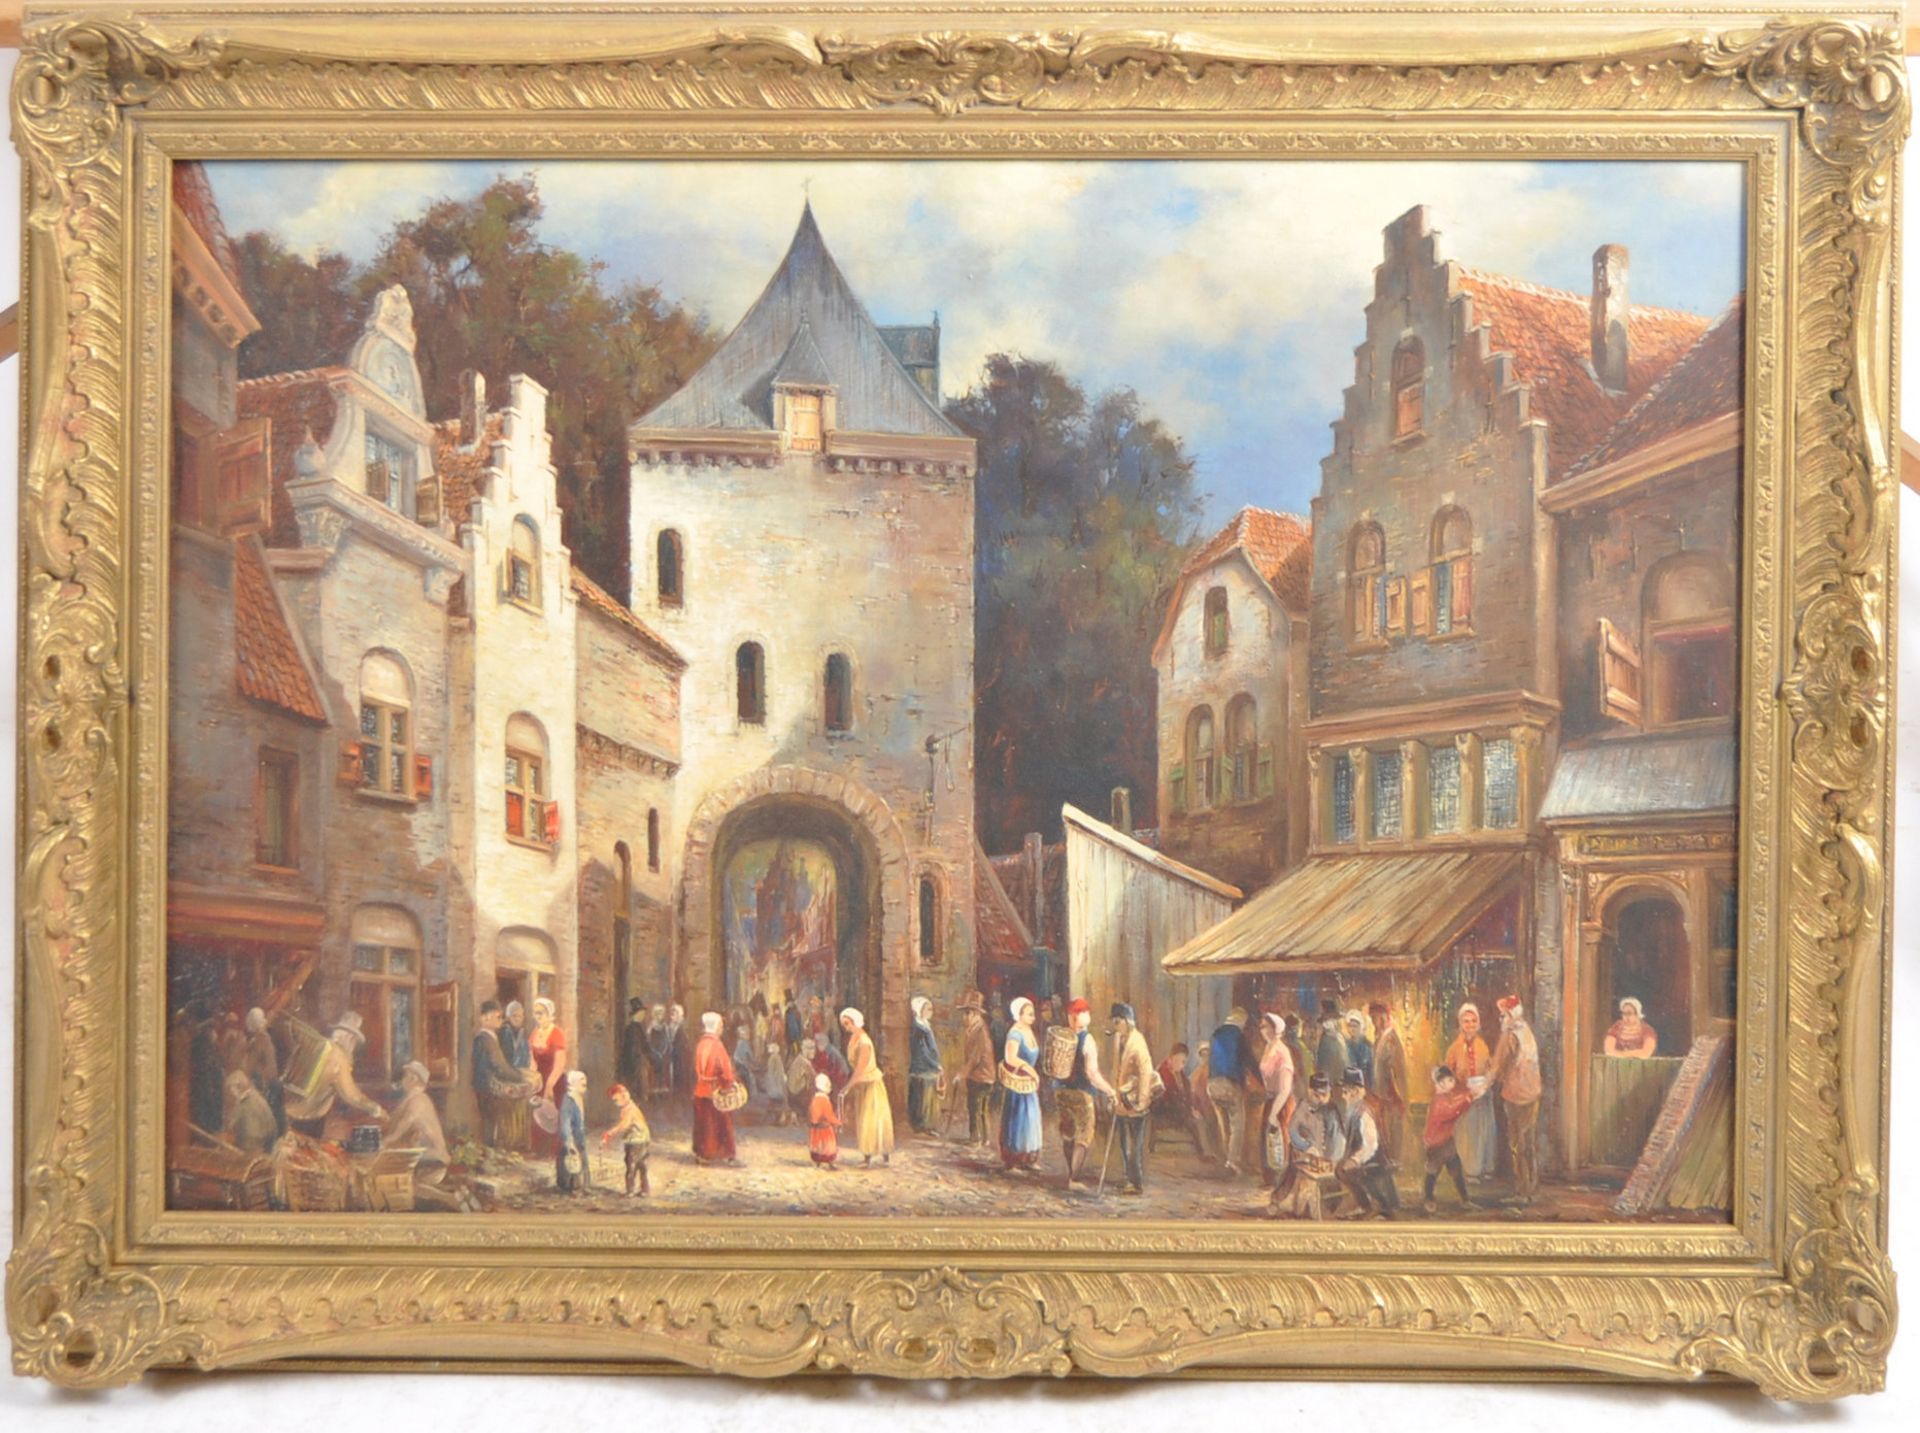 EARLY 20TH CENTURY DUTCH MARKET SCENE OIL PAINTING